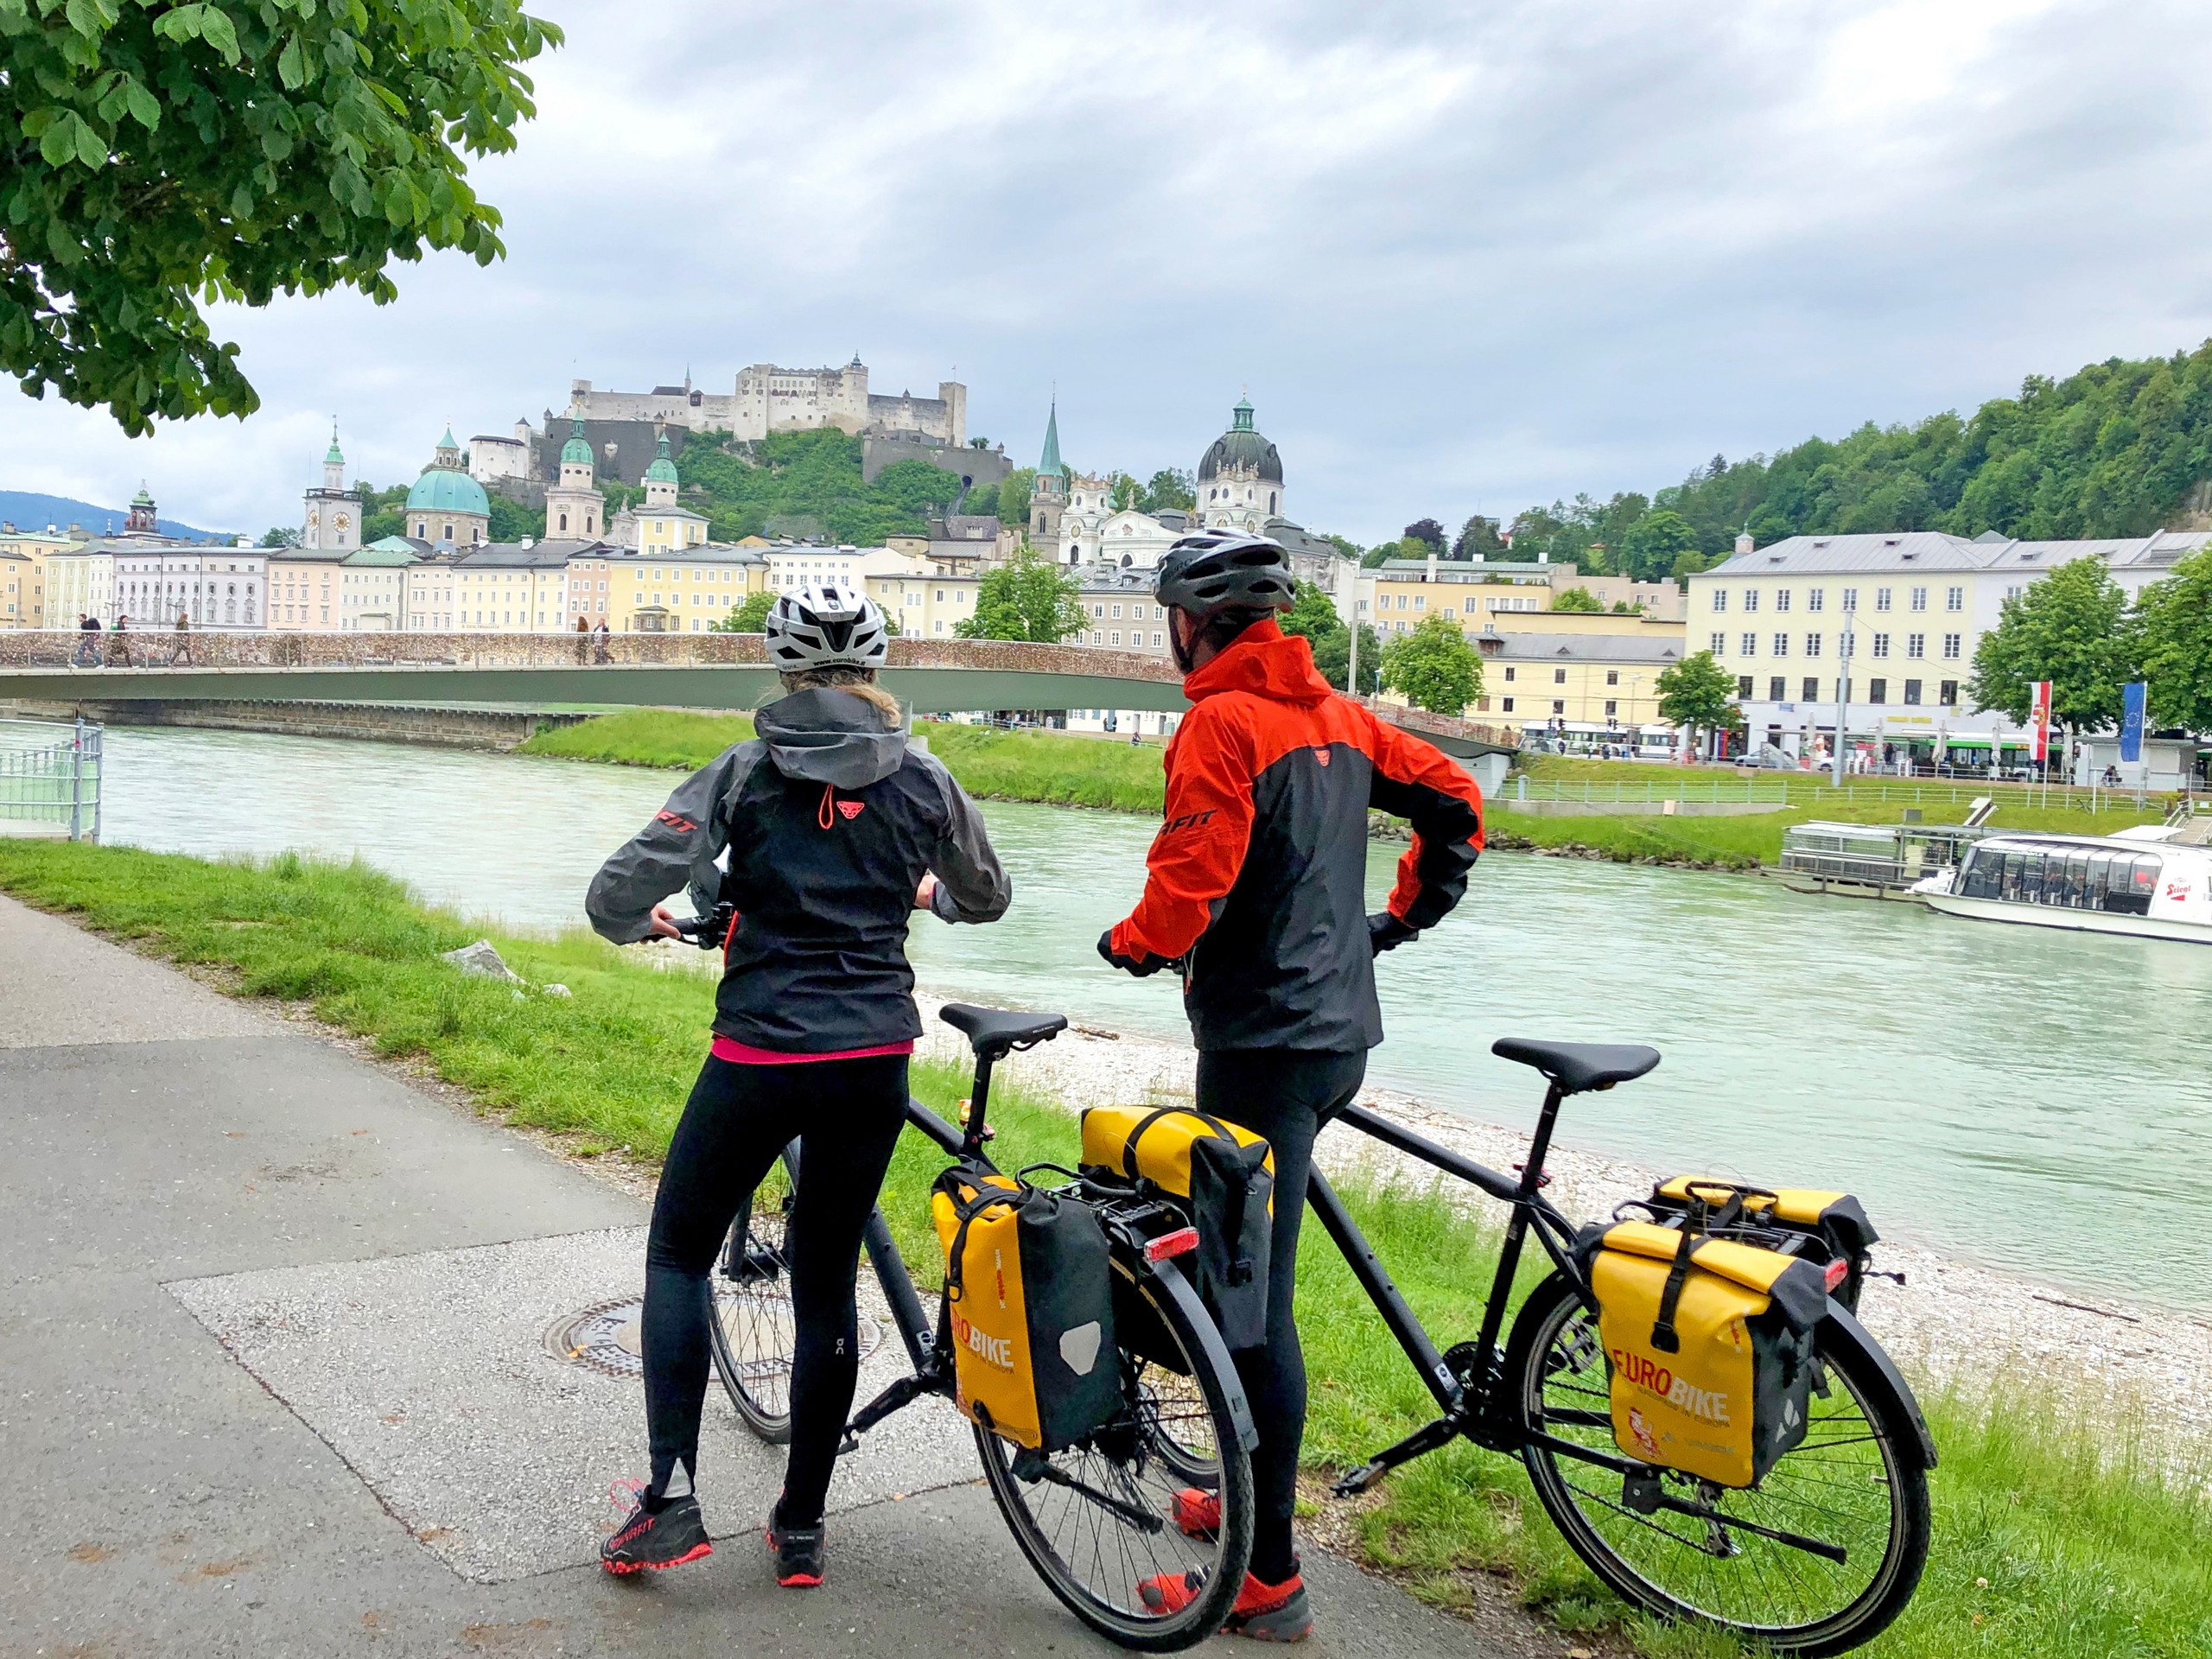 Two cyclists in Austria